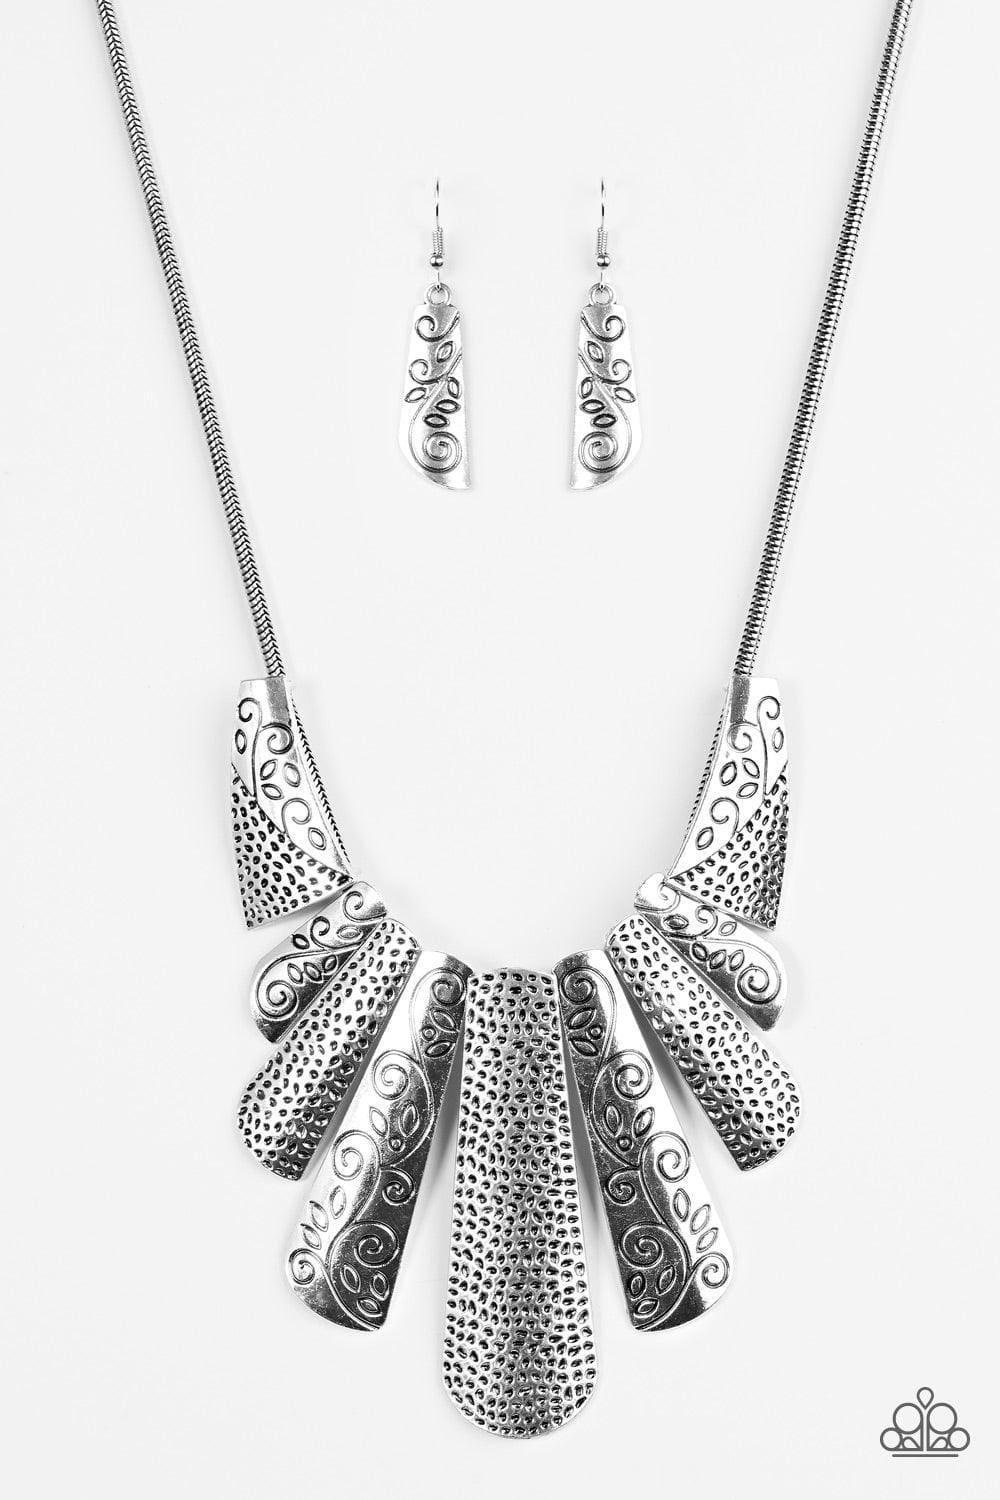 Paparazzi Accessories - Untamed - Silver Necklace - Bling by JessieK